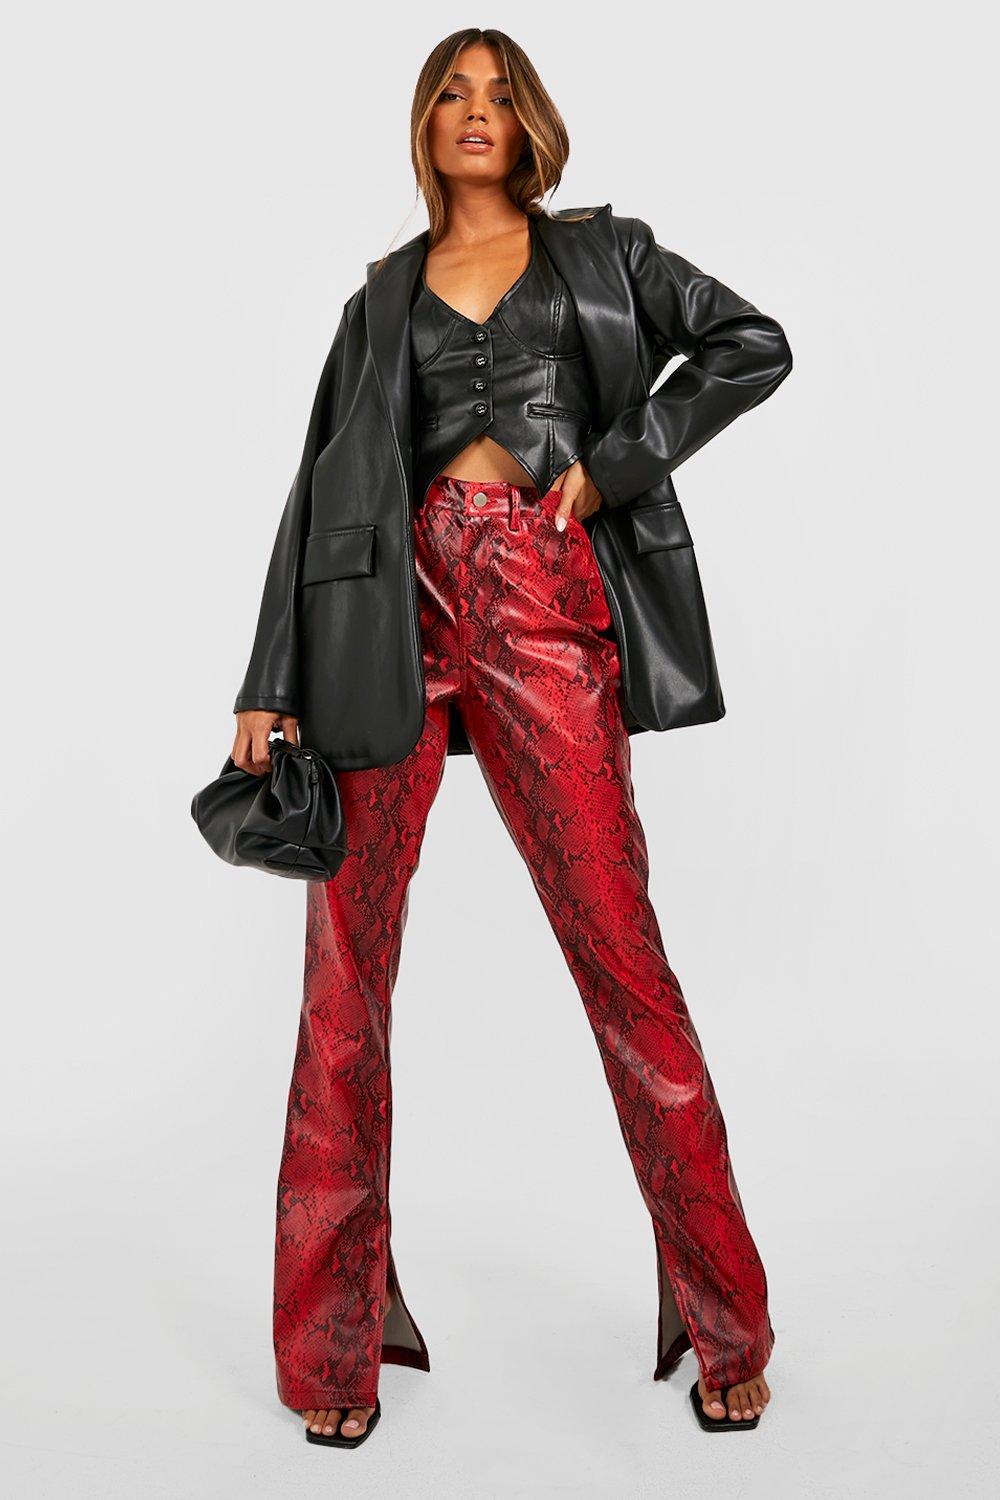 RED SNAKE FAUX LEATHER LEGGINGS